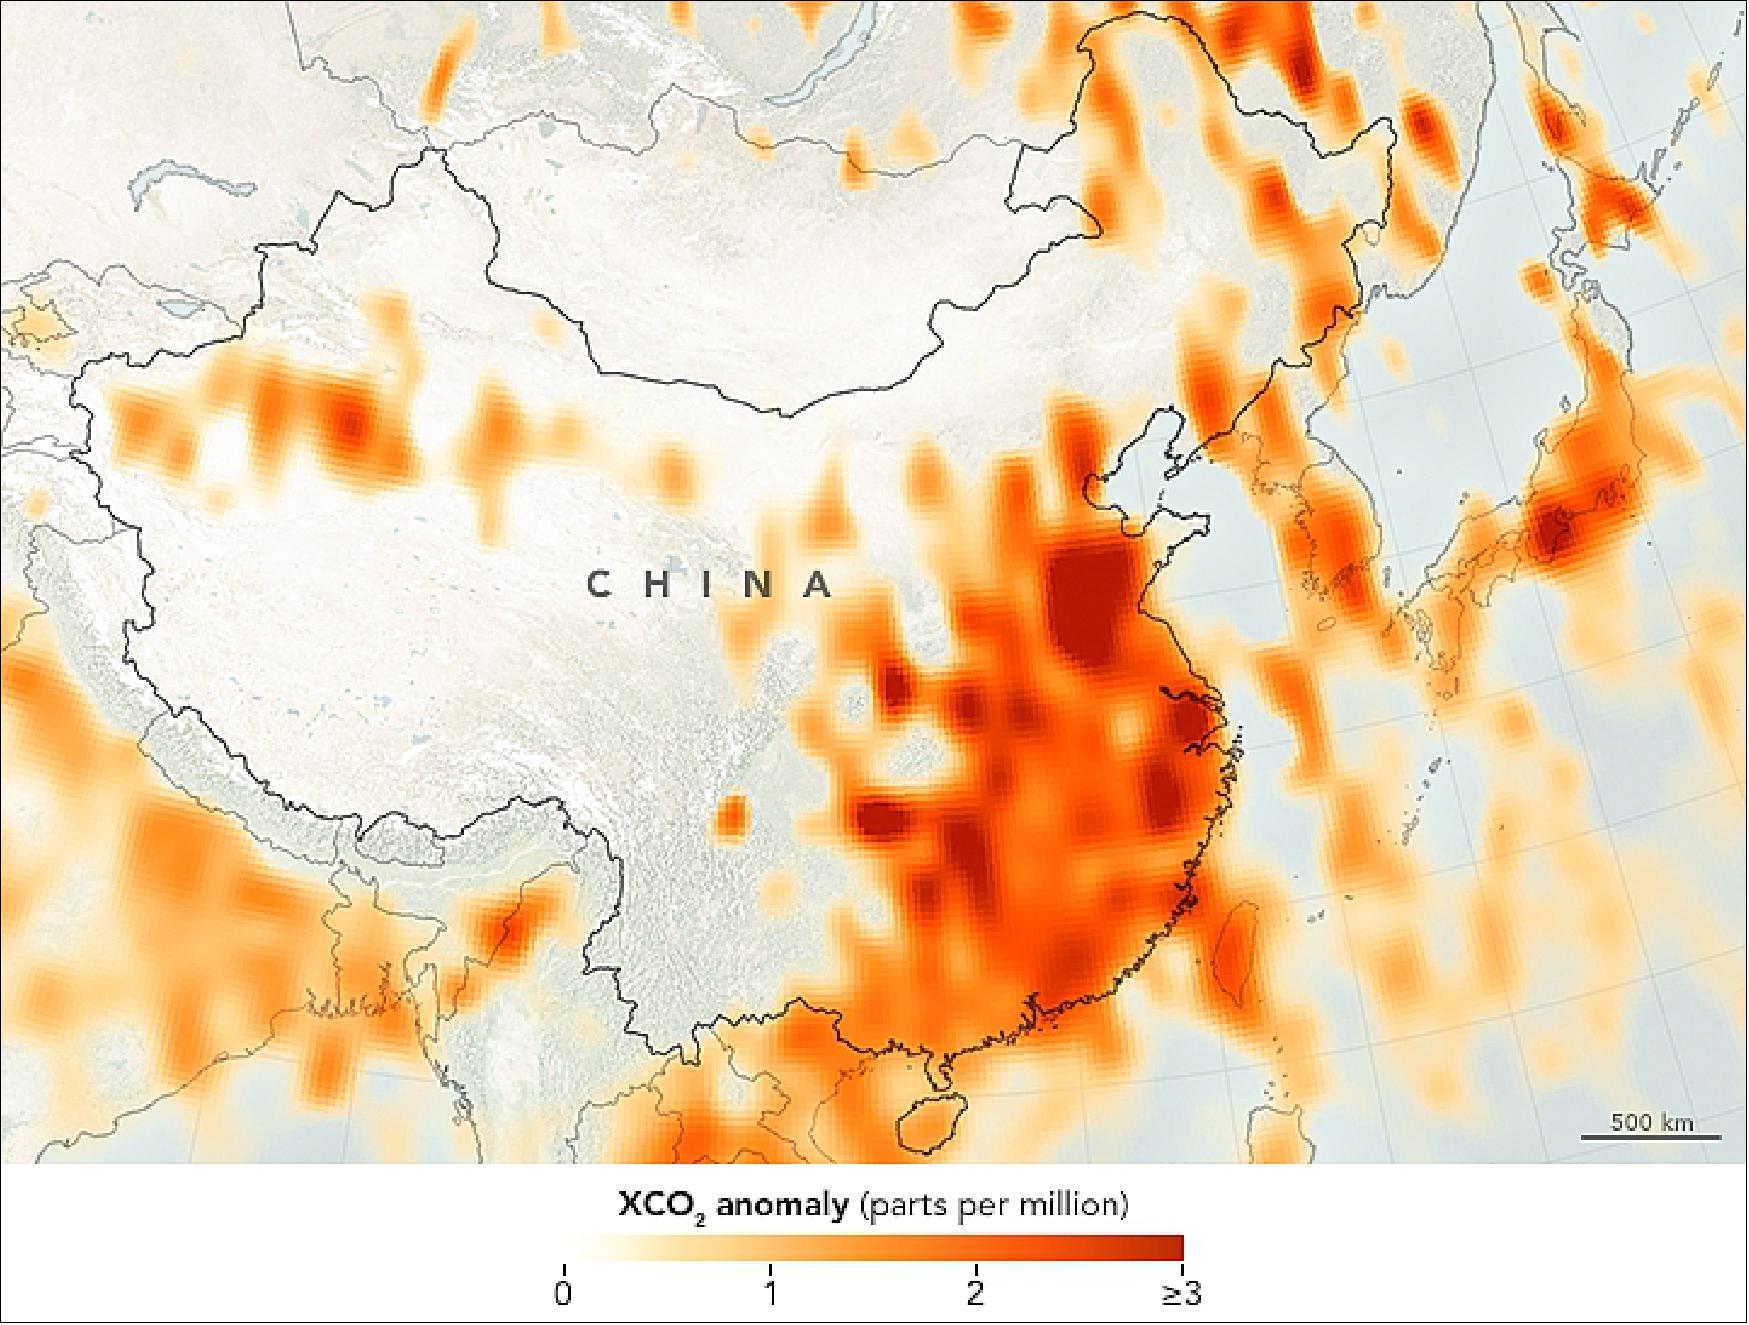 Figure 21: Illustration of OCO-2 CO2 concentrations in China measured in the period 2014-2016 (image credit: NASA Earth Observatory, maps by Joshua Stevens, using OCO-2 anomaly data of Ref. 44)